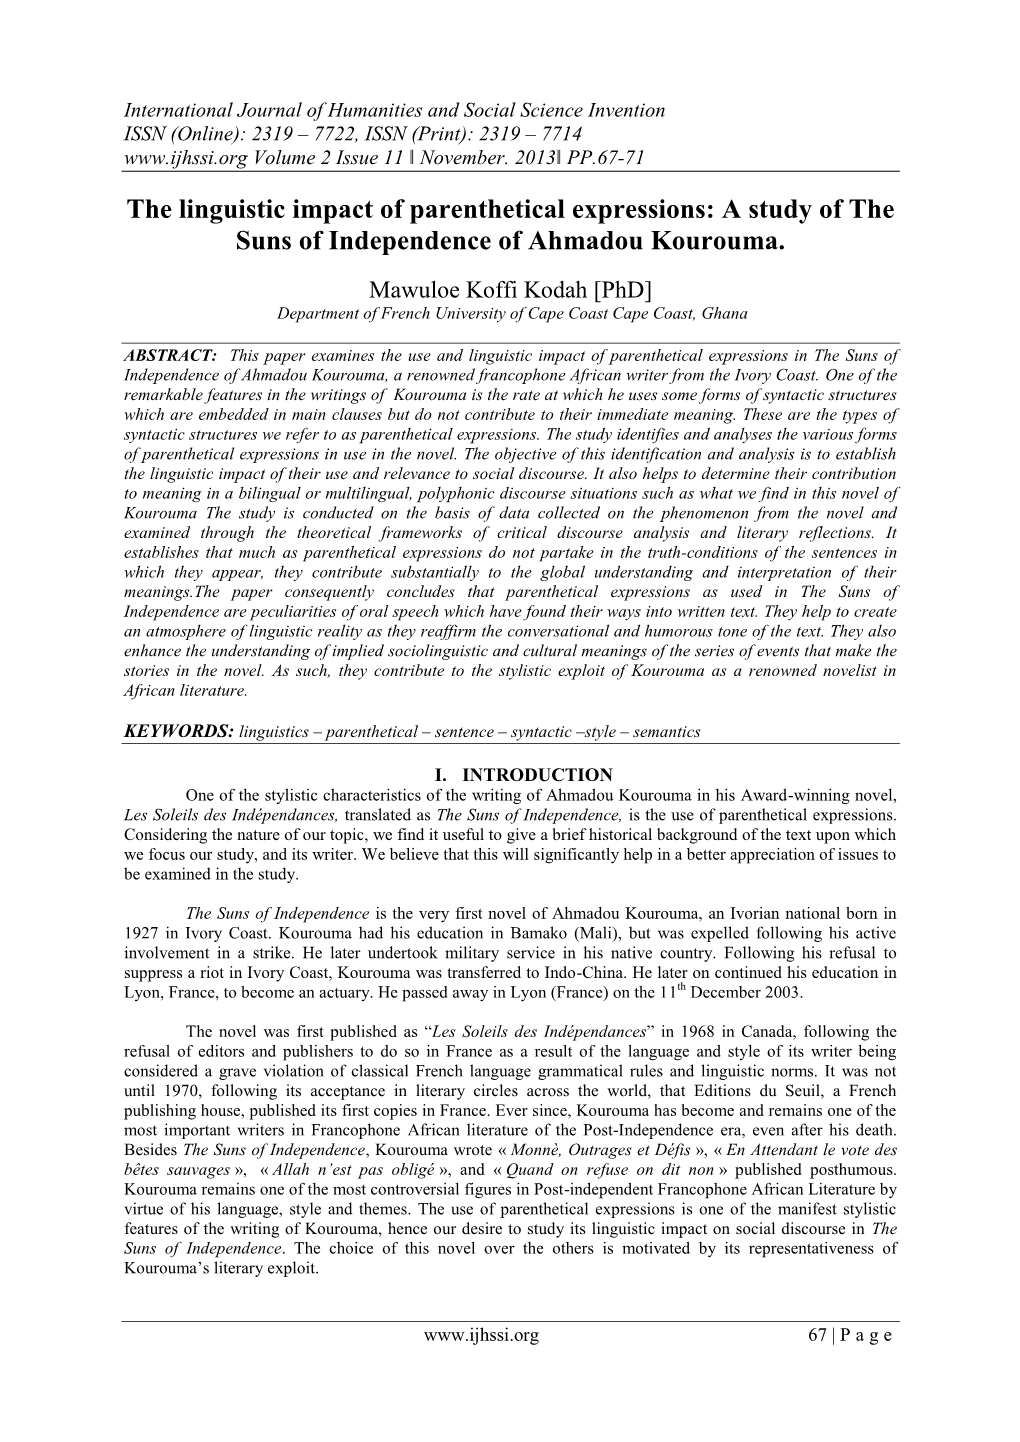 The Linguistic Impact of Parenthetical Expressions: a Study of the Suns of Independence of Ahmadou Kourouma